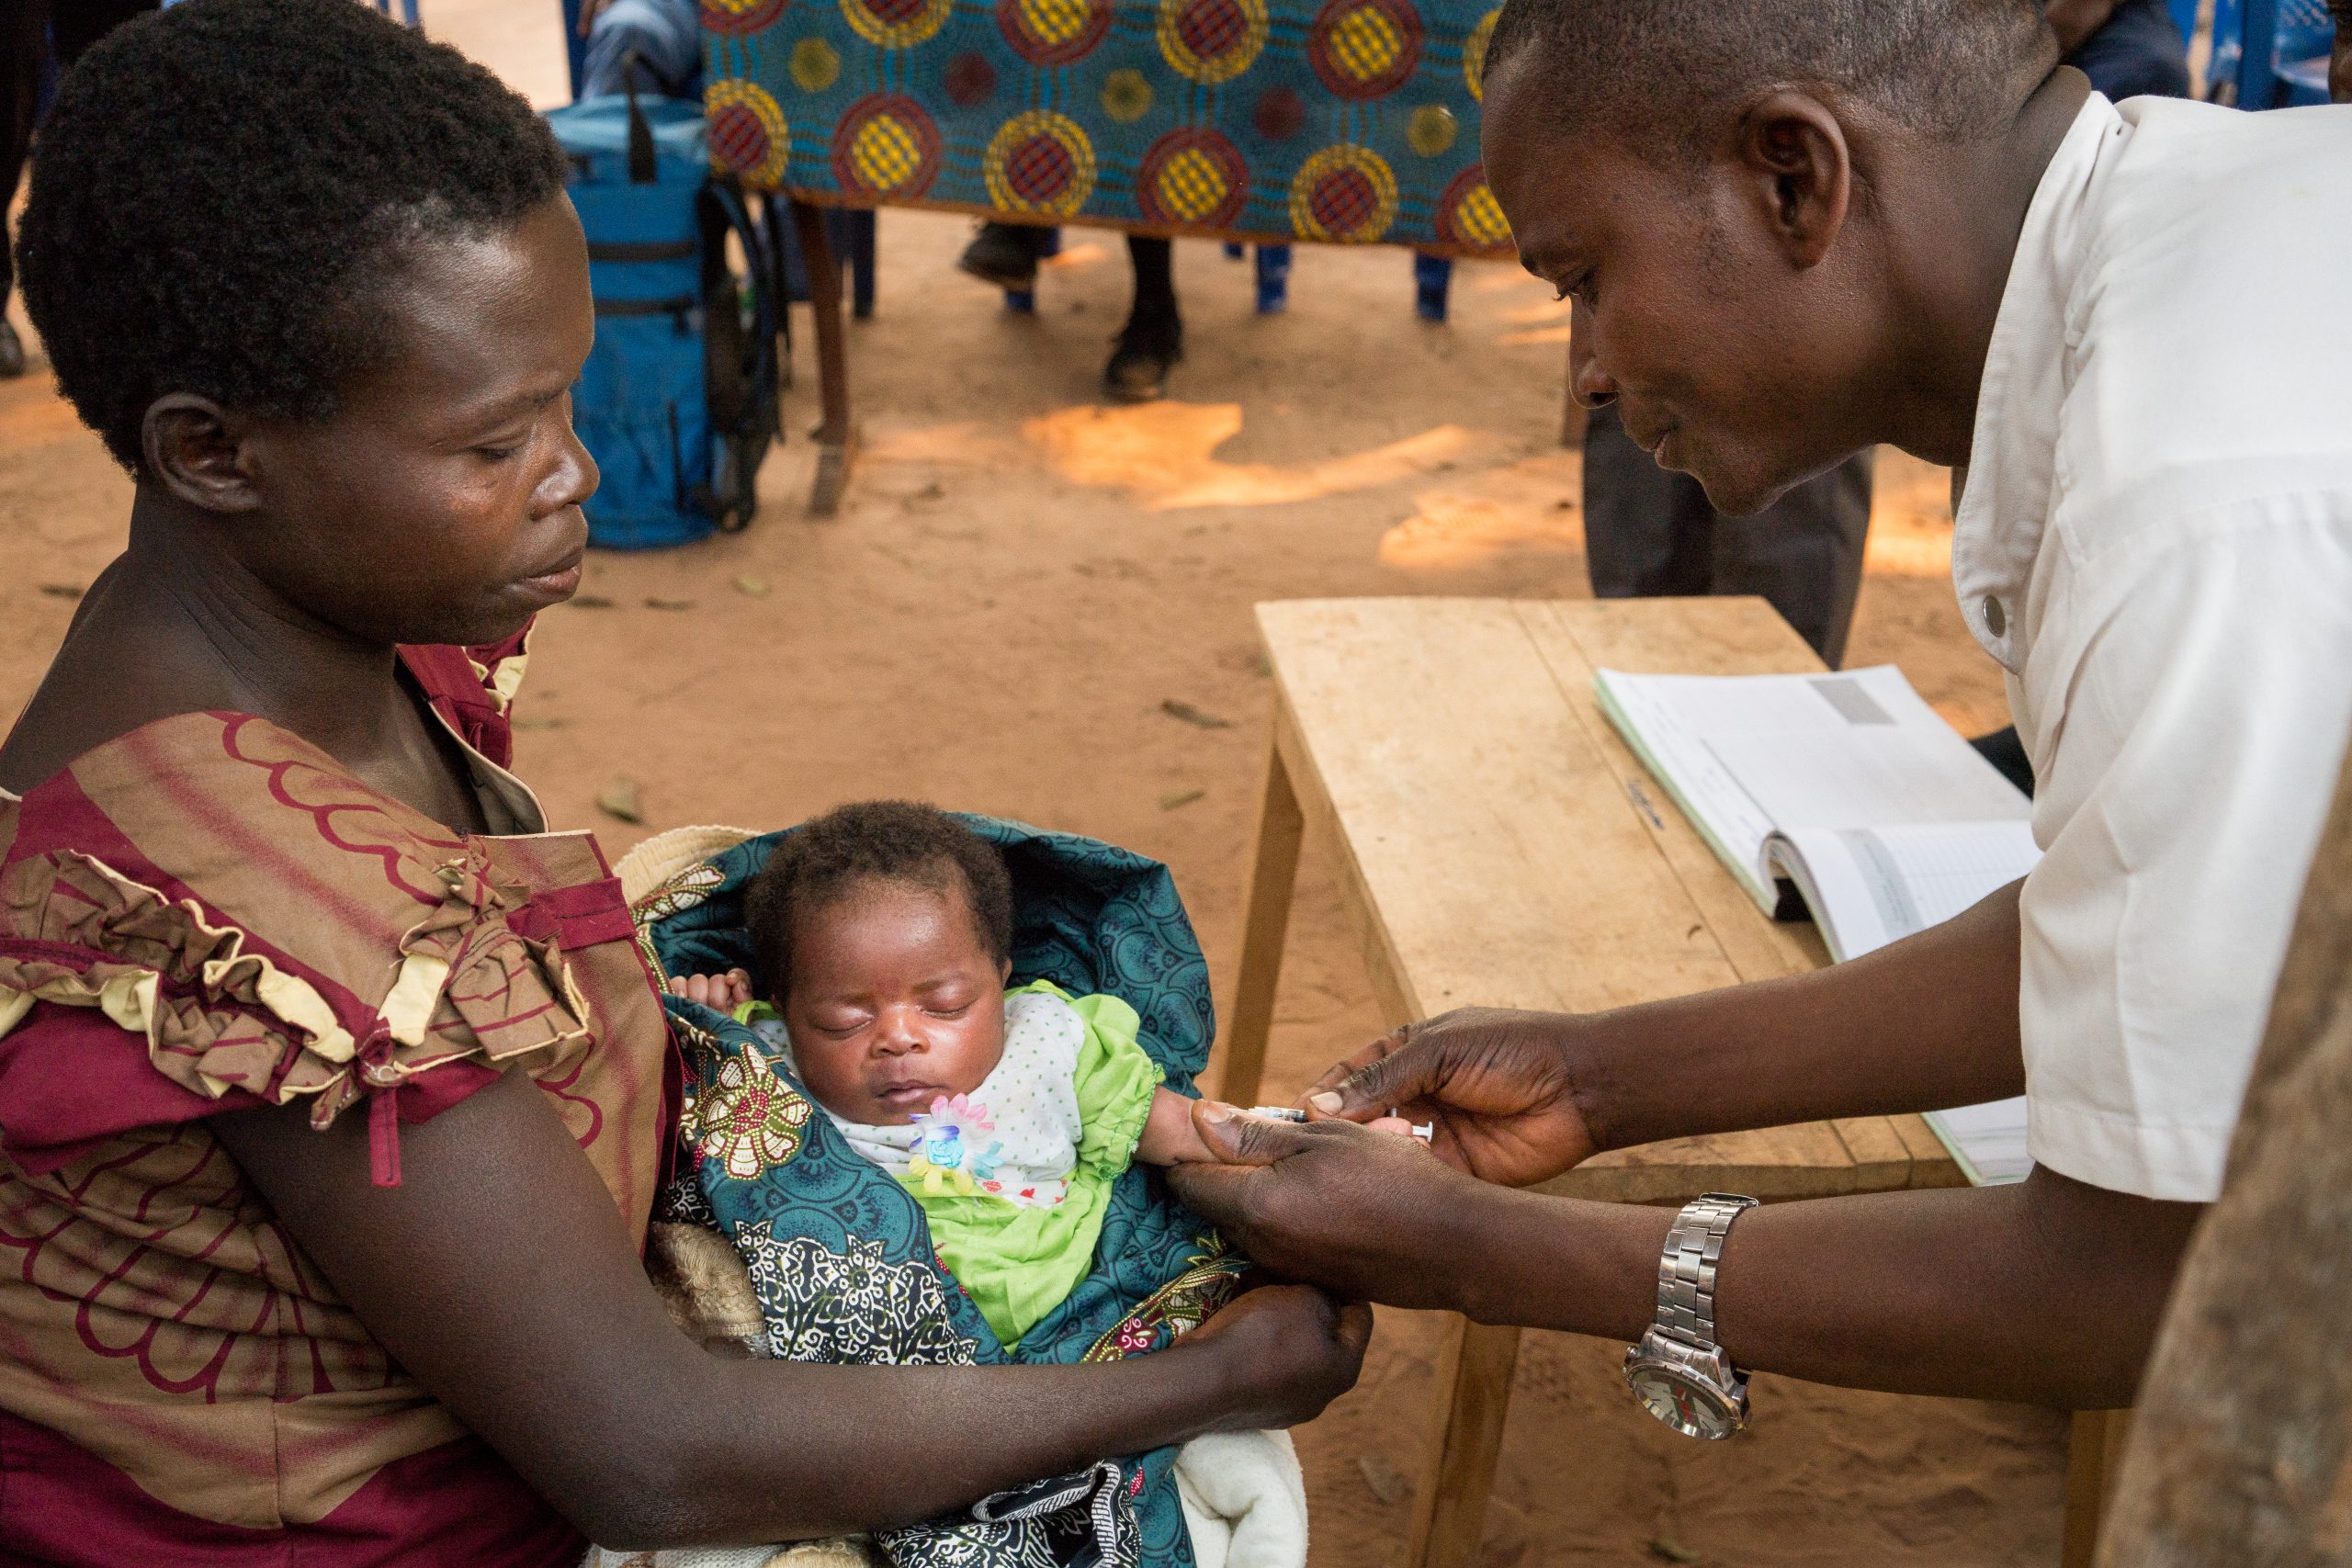 Yvonne Wabanza, 31, holds her 1-month old baby as a nurse administers a BCG vaccine at the Health Center in Kamwenze, Kabongo territory, Haut-Lomami province, Democratic Republic of the Congo on July 24, 2019. This is Yvonne's 6th child.